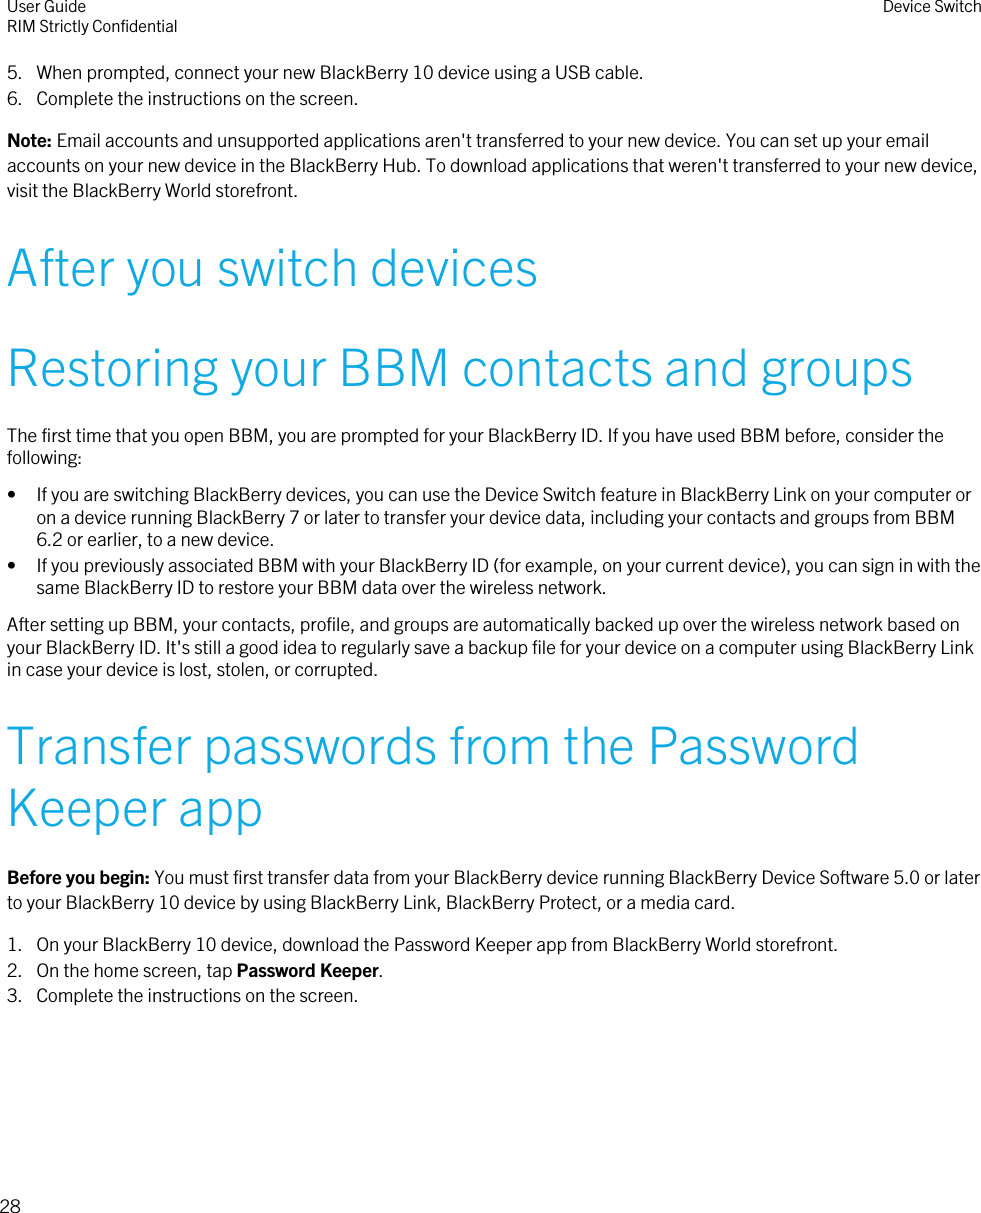 5. When prompted, connect your new BlackBerry 10 device using a USB cable.6. Complete the instructions on the screen.Note: Email accounts and unsupported applications aren&apos;t transferred to your new device. You can set up your emailaccounts on your new device in the BlackBerry Hub. To download applications that weren&apos;t transferred to your new device,visit the BlackBerry World storefront.After you switch devicesRestoring your BBM contacts and groupsThe first time that you open BBM, you are prompted for your BlackBerry ID. If you have used BBM before, consider thefollowing:• If you are switching BlackBerry devices, you can use the Device Switch feature in BlackBerry Link on your computer oron a device running BlackBerry 7 or later to transfer your device data, including your contacts and groups from BBM6.2 or earlier, to a new device.• If you previously associated BBM with your BlackBerry ID (for example, on your current device), you can sign in with thesame BlackBerry ID to restore your BBM data over the wireless network.After setting up BBM, your contacts, profile, and groups are automatically backed up over the wireless network based onyour BlackBerry ID. It&apos;s still a good idea to regularly save a backup file for your device on a computer using BlackBerry Linkin case your device is lost, stolen, or corrupted.Transfer passwords from the PasswordKeeper appBefore you begin: You must first transfer data from your BlackBerry device running BlackBerry Device Software 5.0 or laterto your BlackBerry 10 device by using BlackBerry Link, BlackBerry Protect, or a media card.1. On your BlackBerry 10 device, download the Password Keeper app from BlackBerry World storefront.2. On the home screen, tap Password Keeper.3. Complete the instructions on the screen.User GuideRIM Strictly Confidential Device Switch28